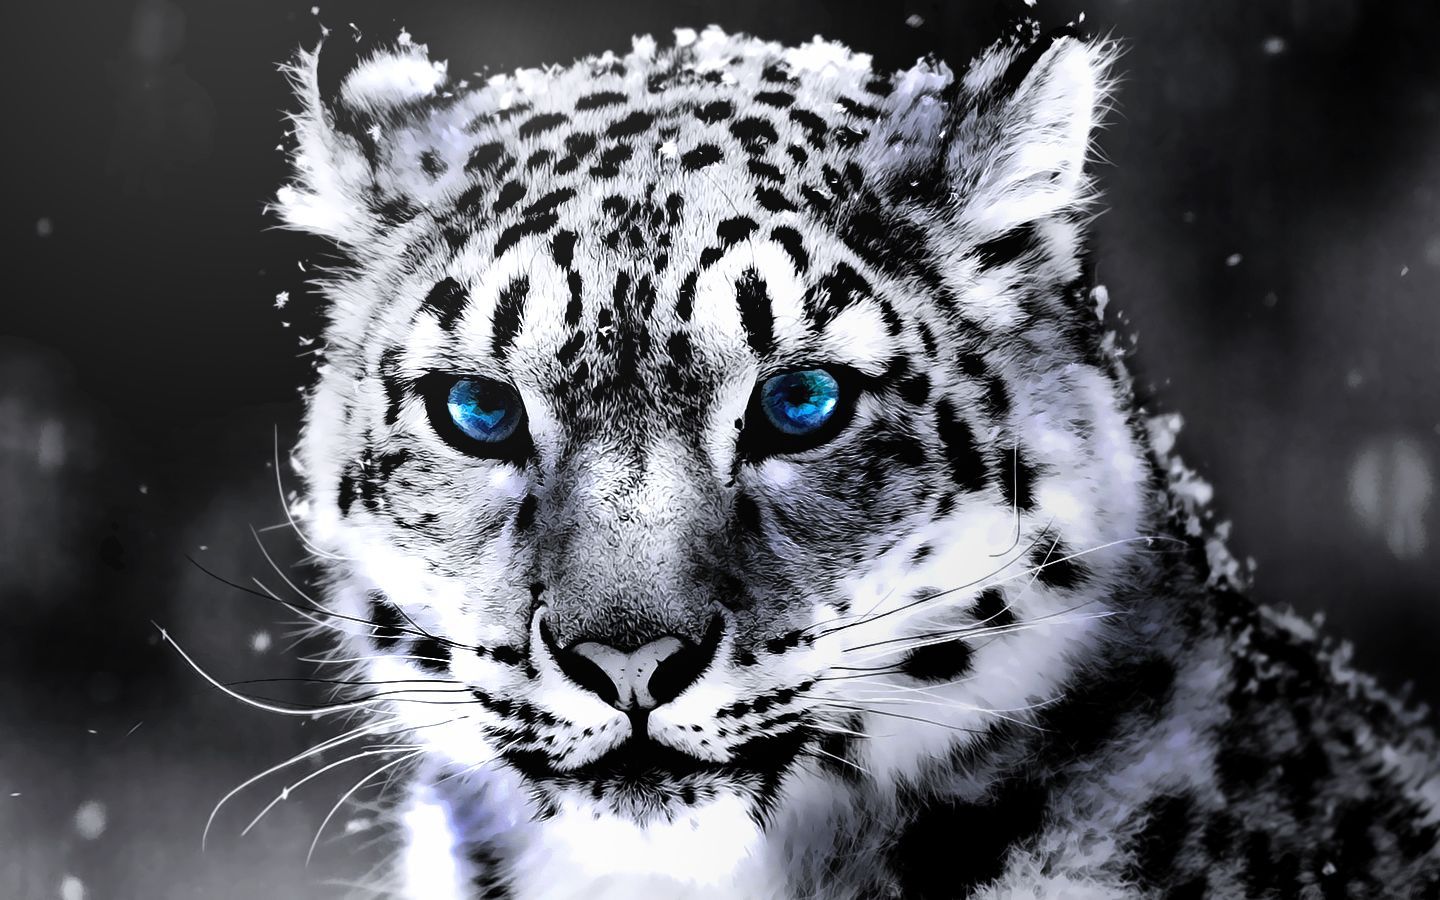 white tigers wallpaper hd 8 - High Definition : Widescreen Wallpapers